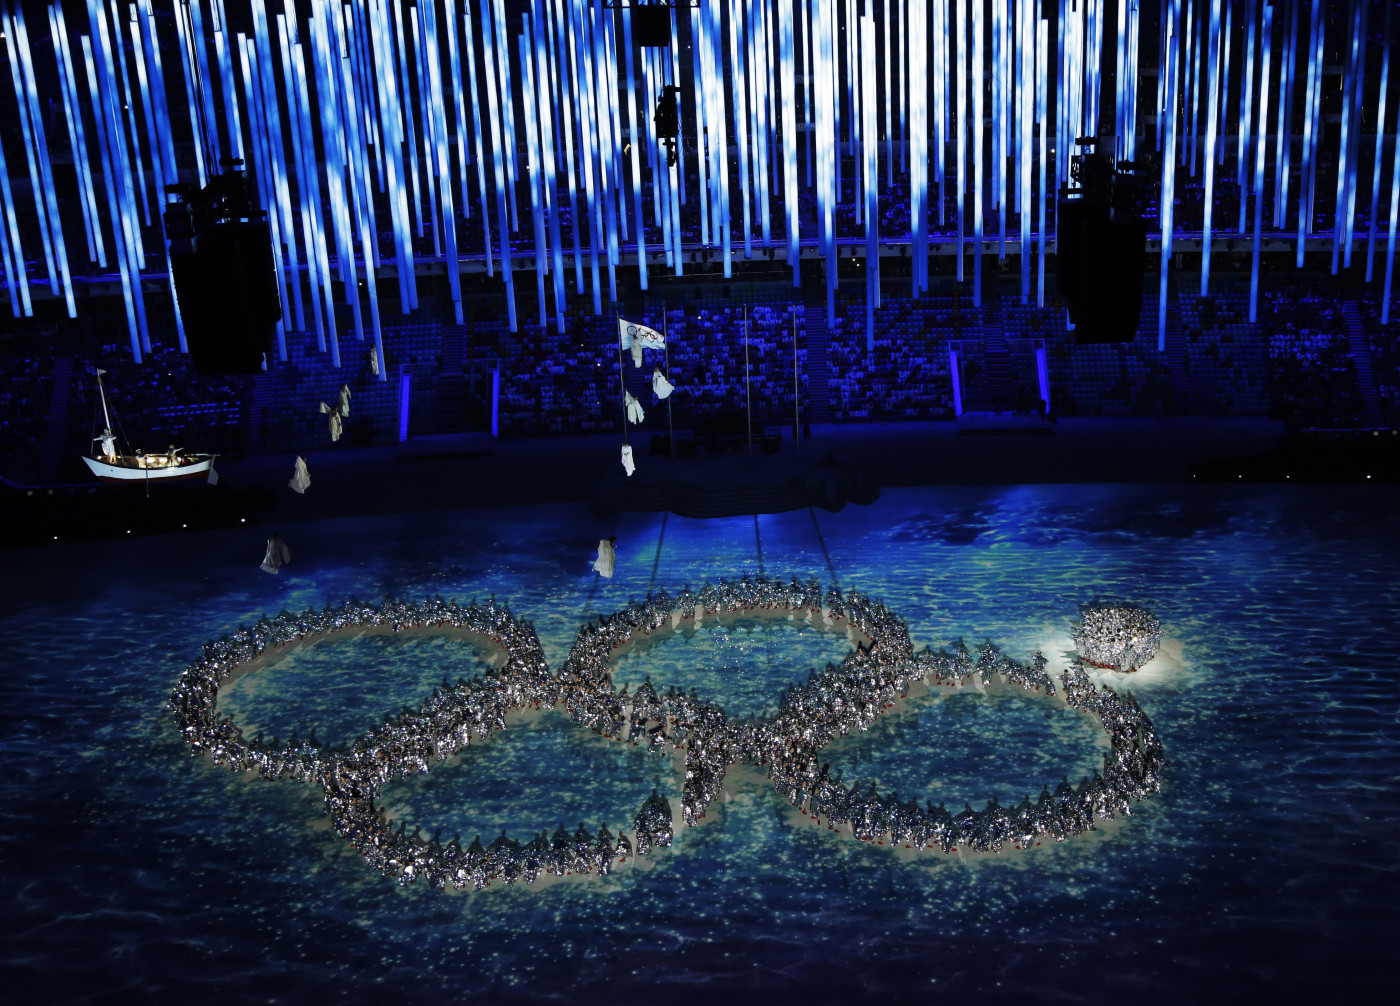 Performers recreate the fifth Olympic ring that didn't open in the opening ceremony during the closing ceremony of the 2014 Winter Olympics, Sunday, Feb. 23, 2014, in Sochi, Russia. (David J. Phillip&mdash;AP)